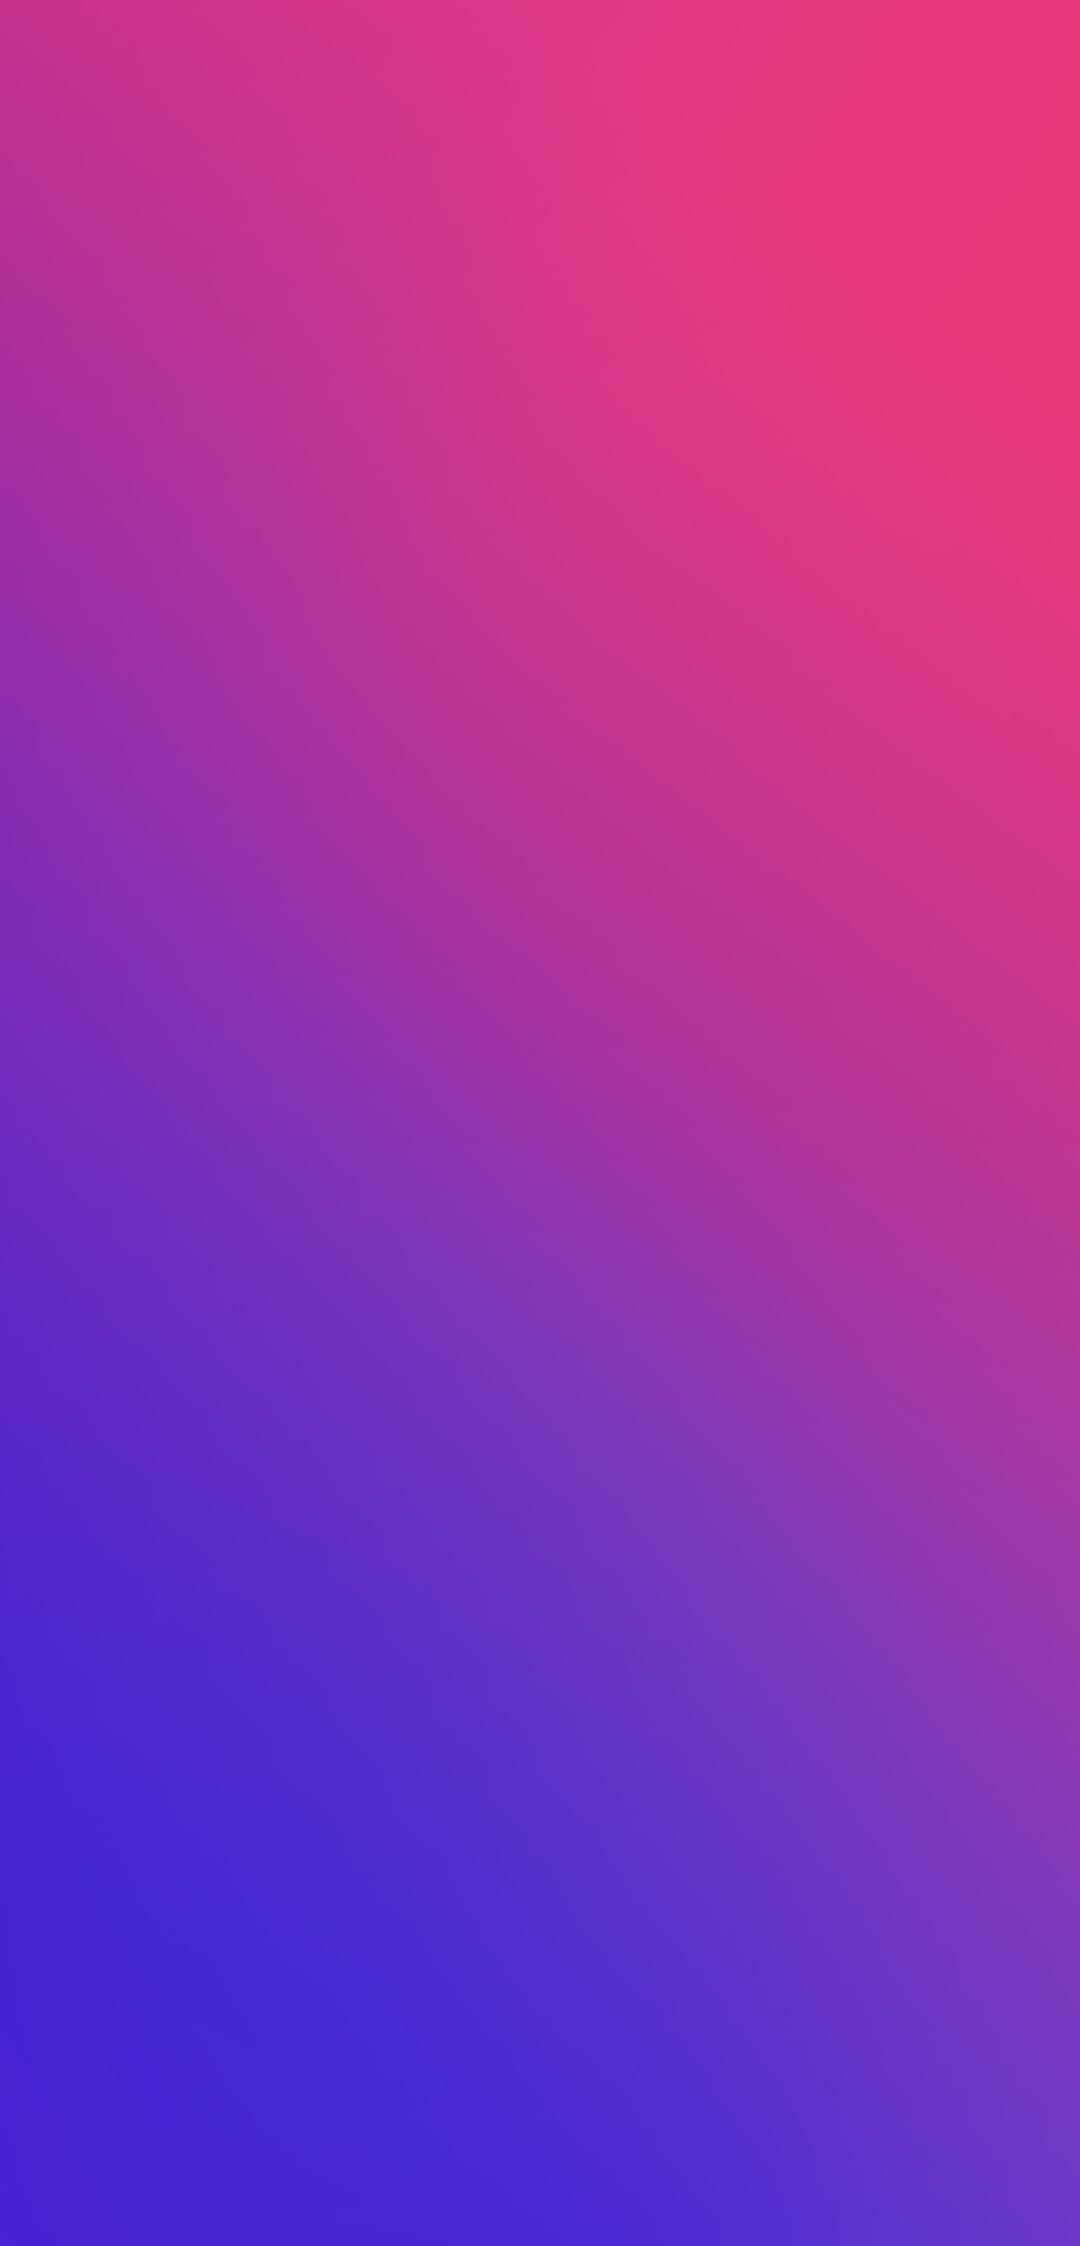 Lenovo Z5s and S5 Pro HD Wallpapers